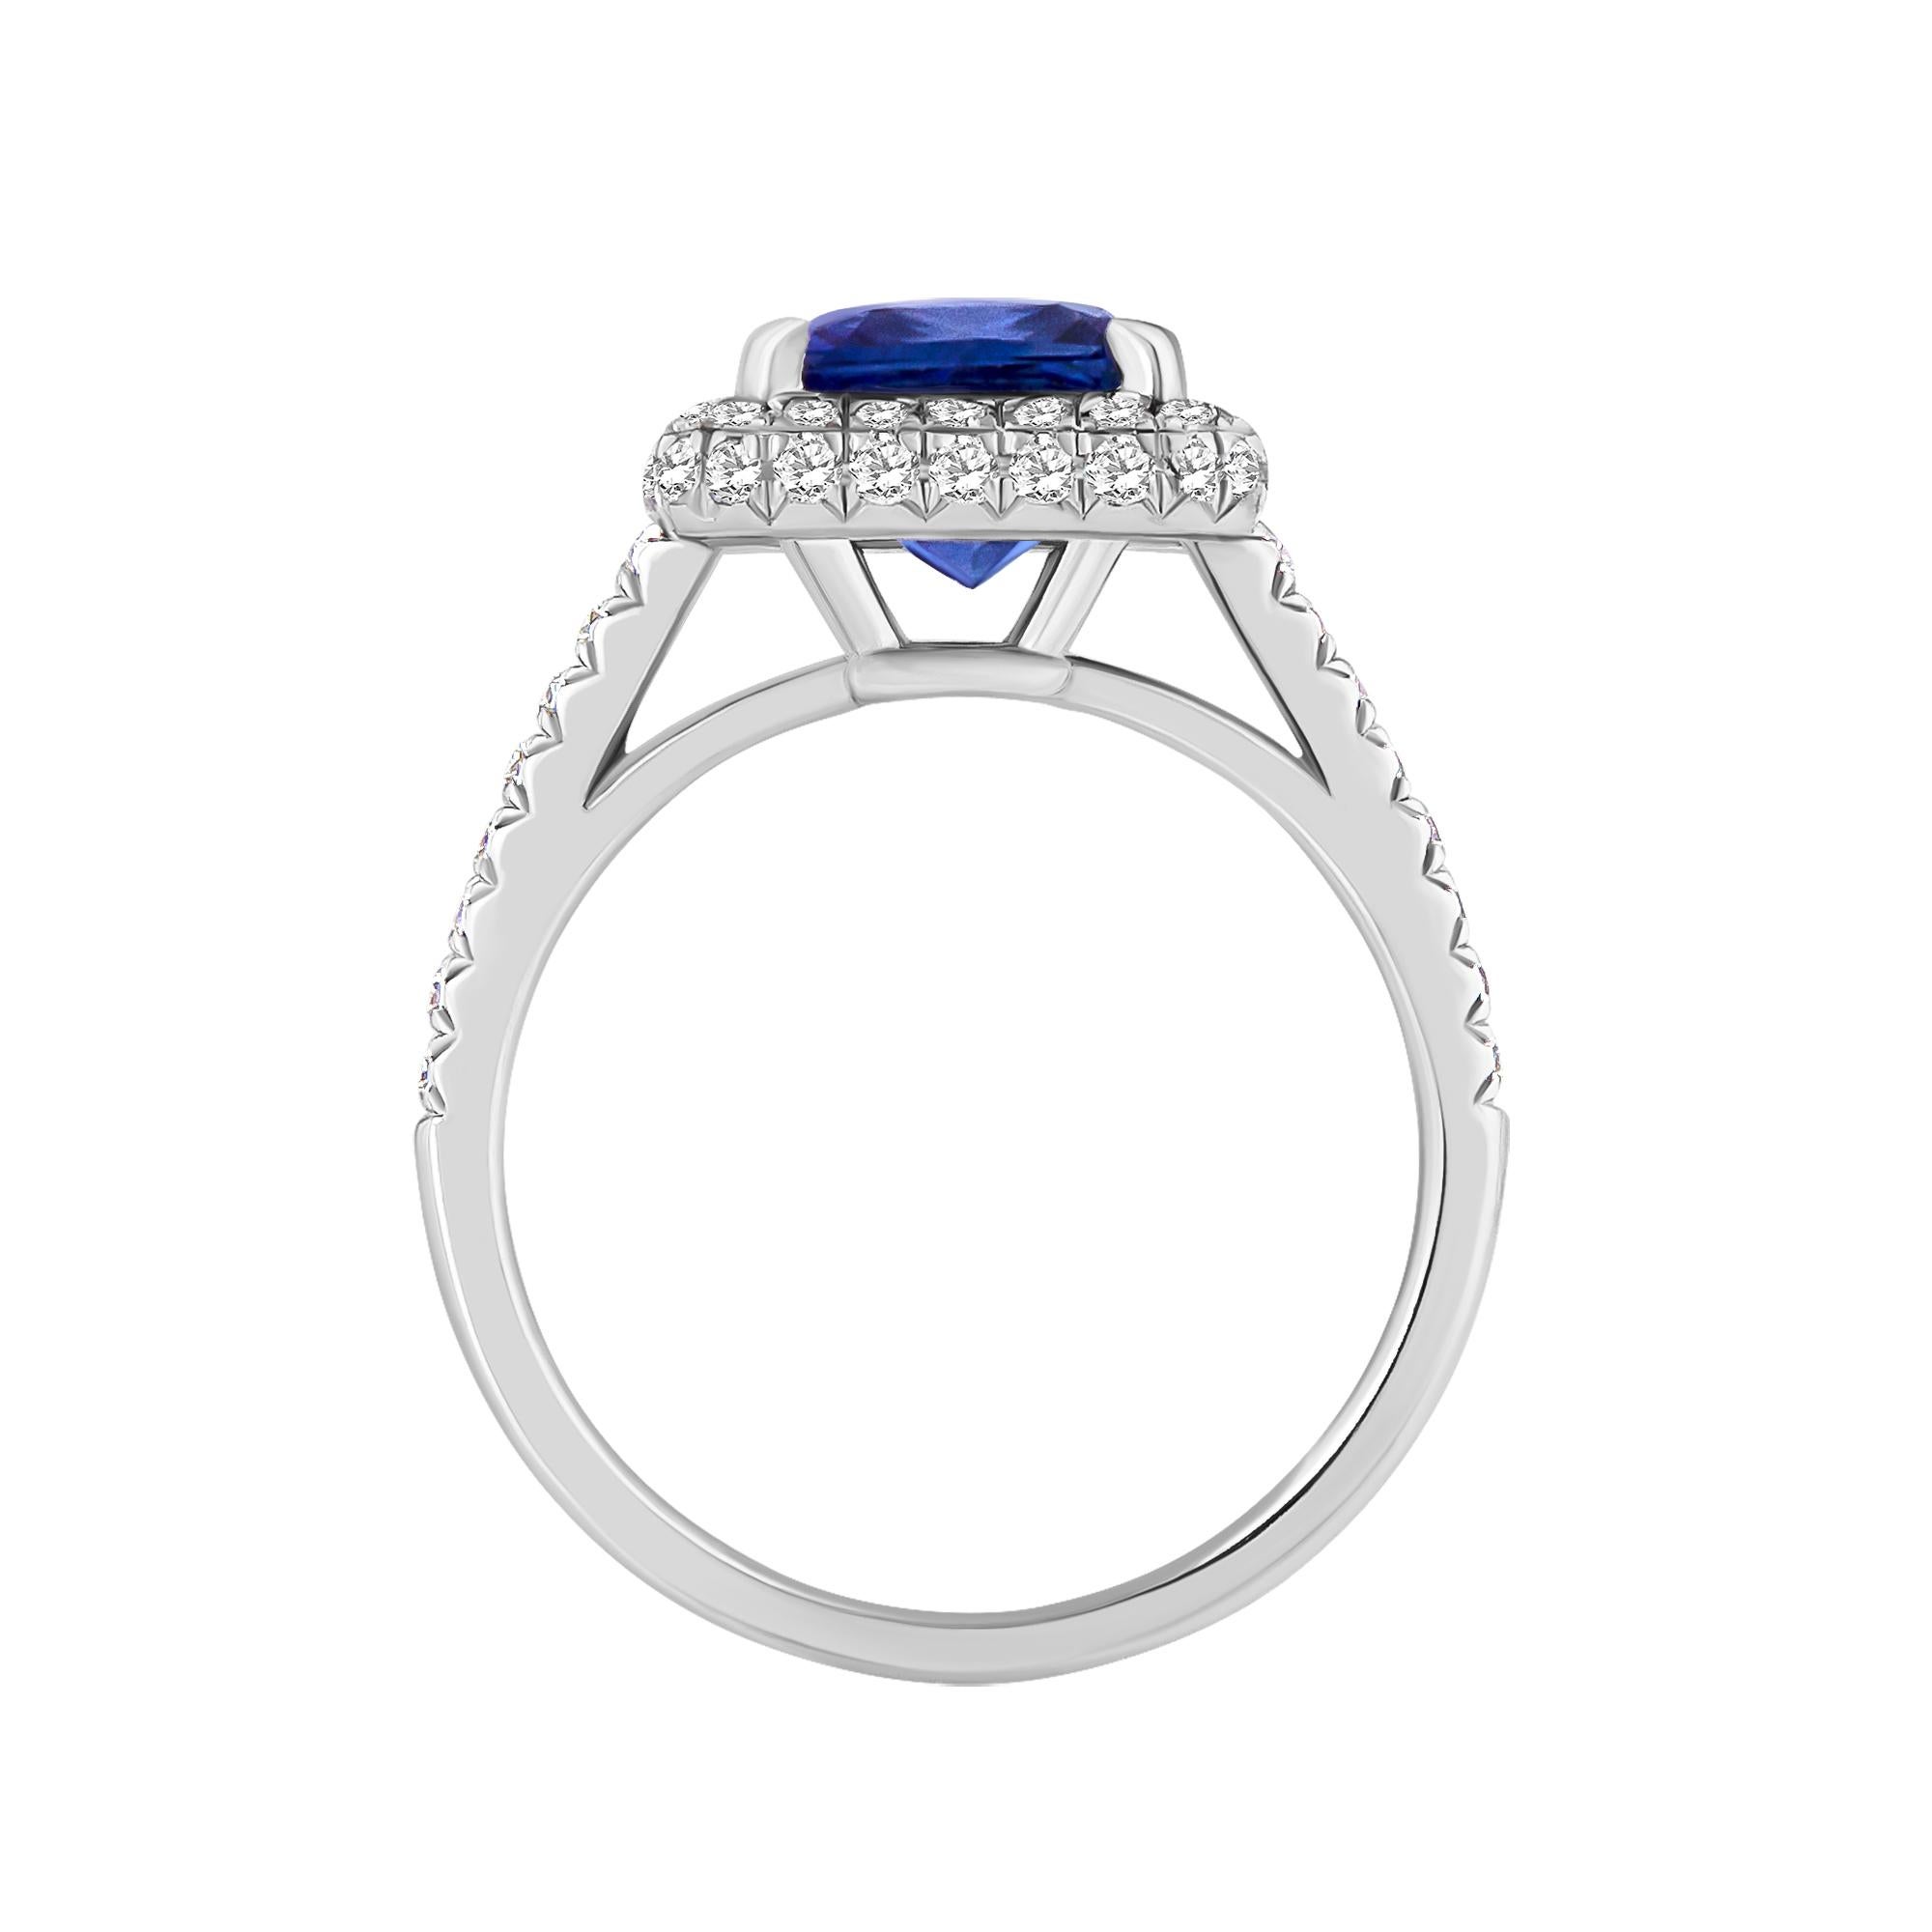 This beautiful Diamond Sapphire ring was crafted in luxurious Platinum. This ring is adorned with a baby blue Color; A 3.36 Carat ceylon Sapphire set in the cetner Measuring approx 8.25x8.10mm. The ring is handmade with each diamond being pave set 